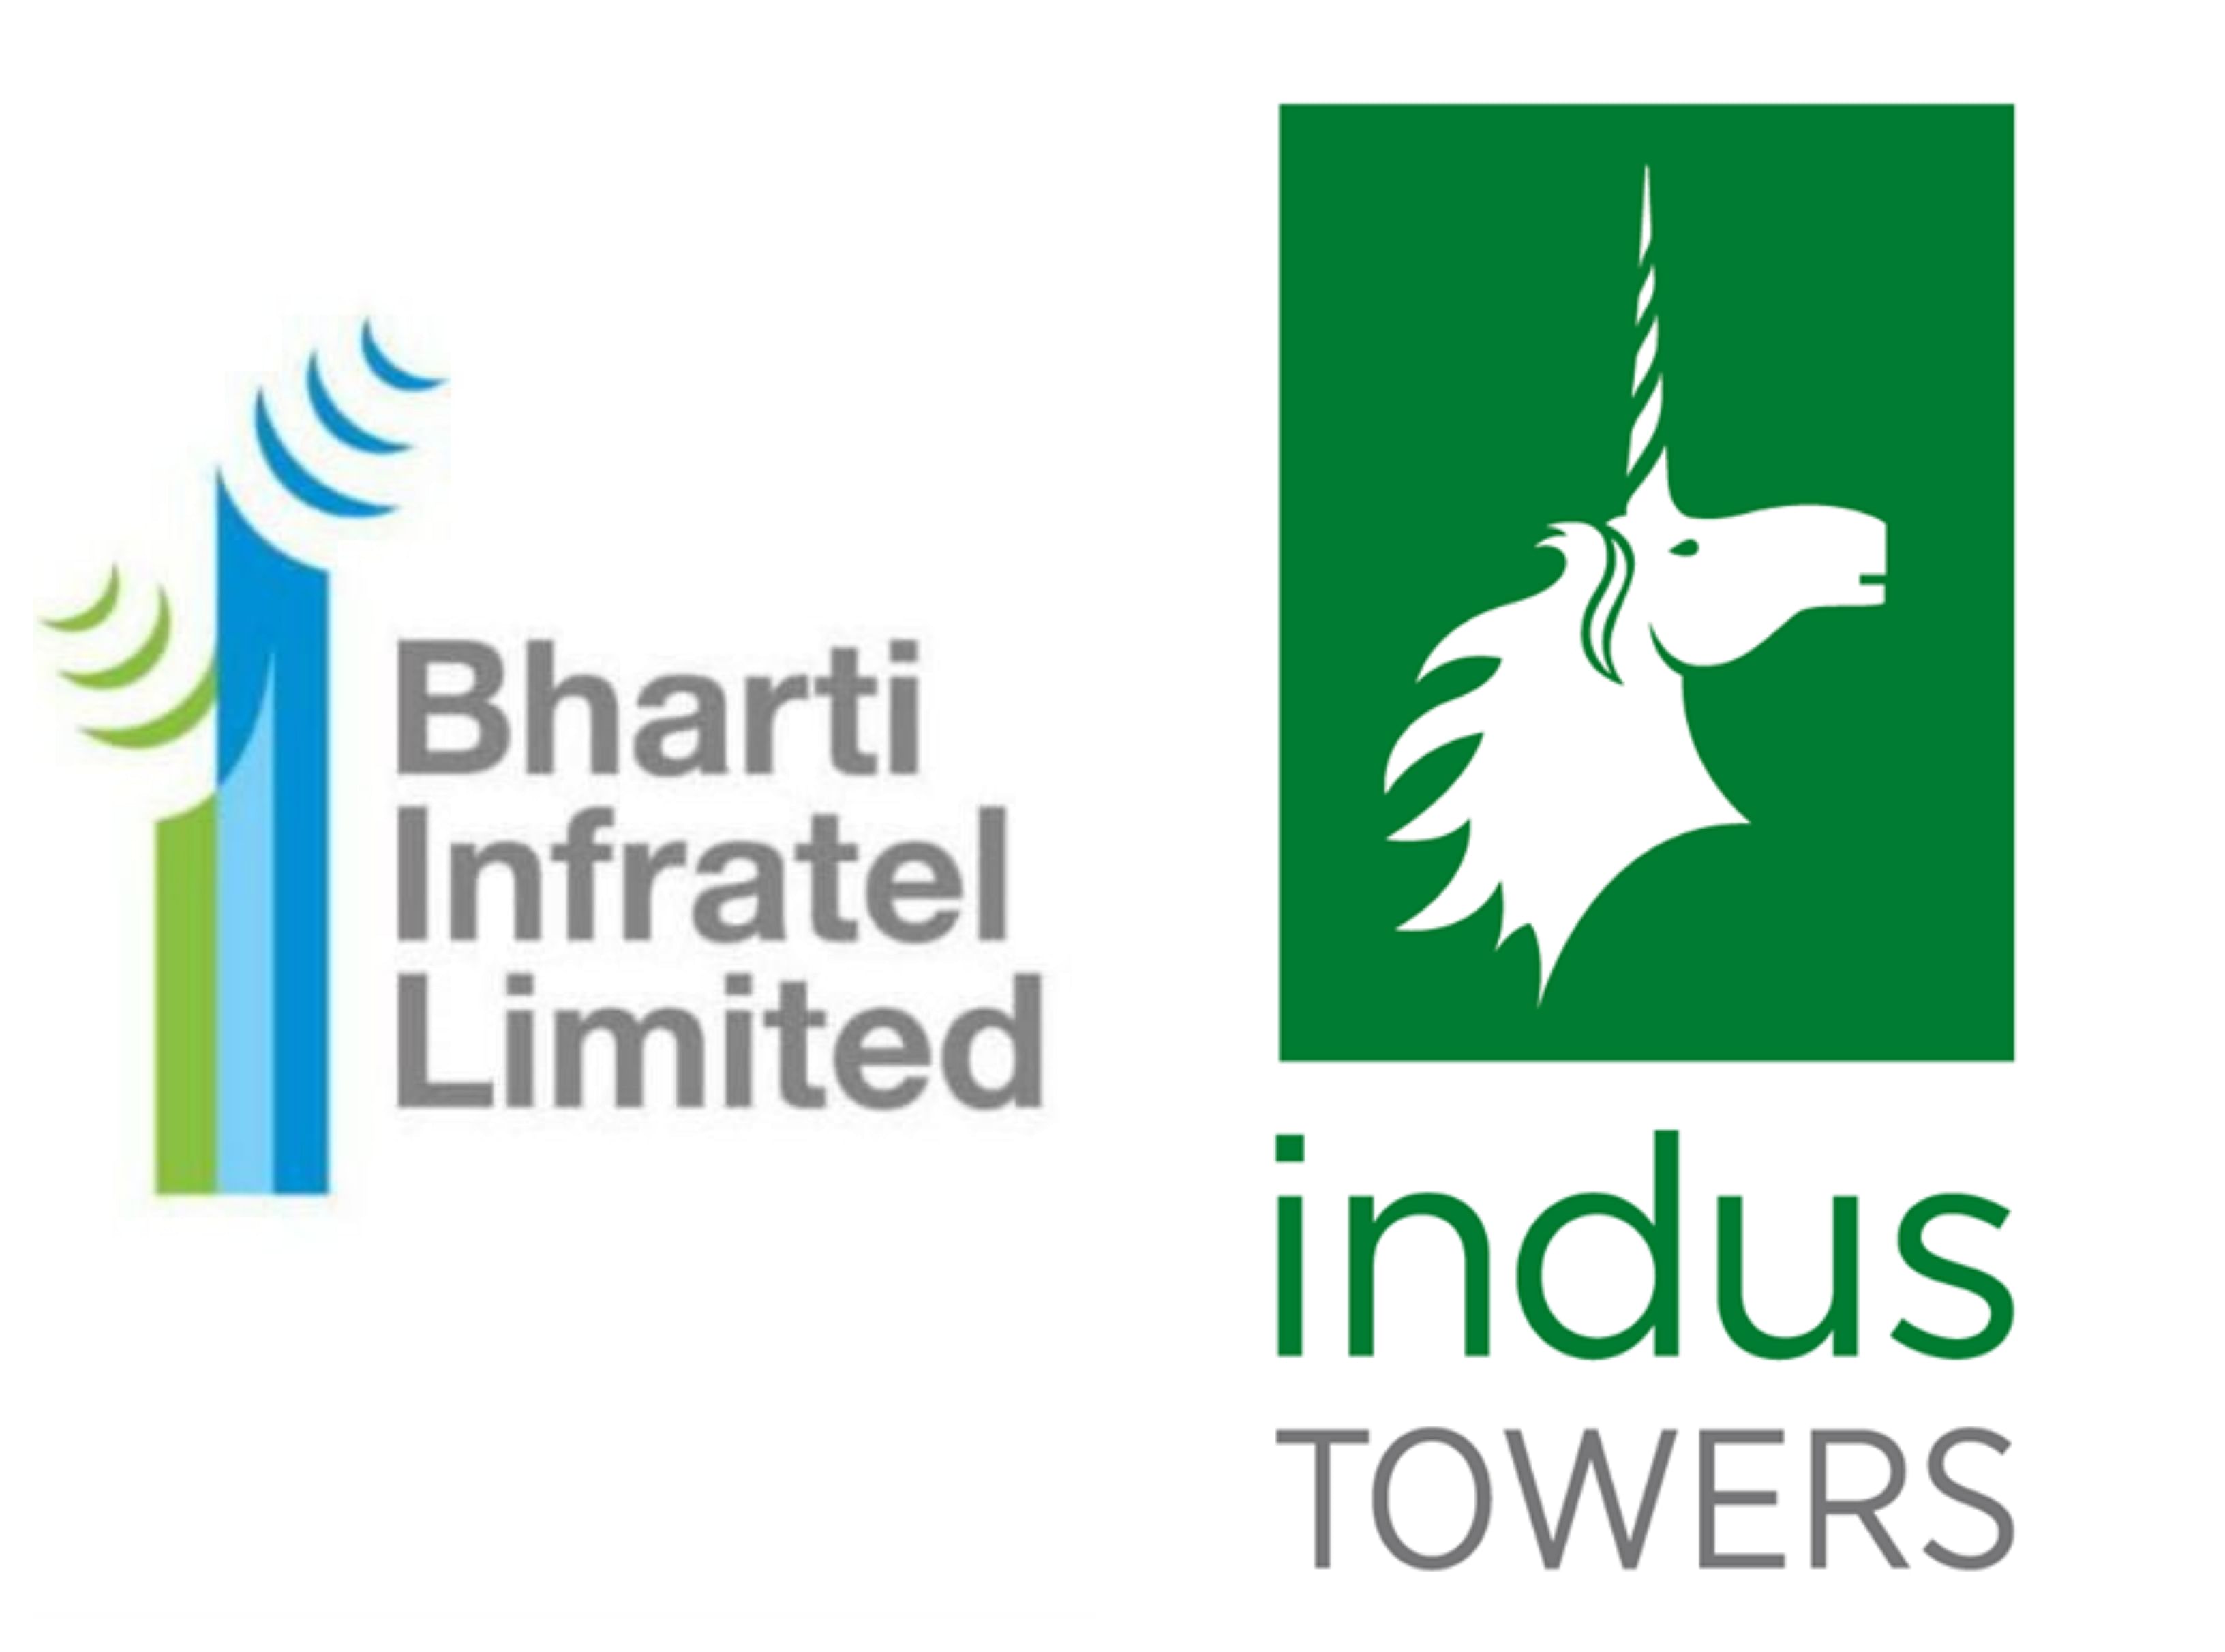 Bharti Infratel and Indus Towers merger deal was signed on April 23 last year and was to have been concluded by October 24. However the merger was delayed in absence of DOT approval.